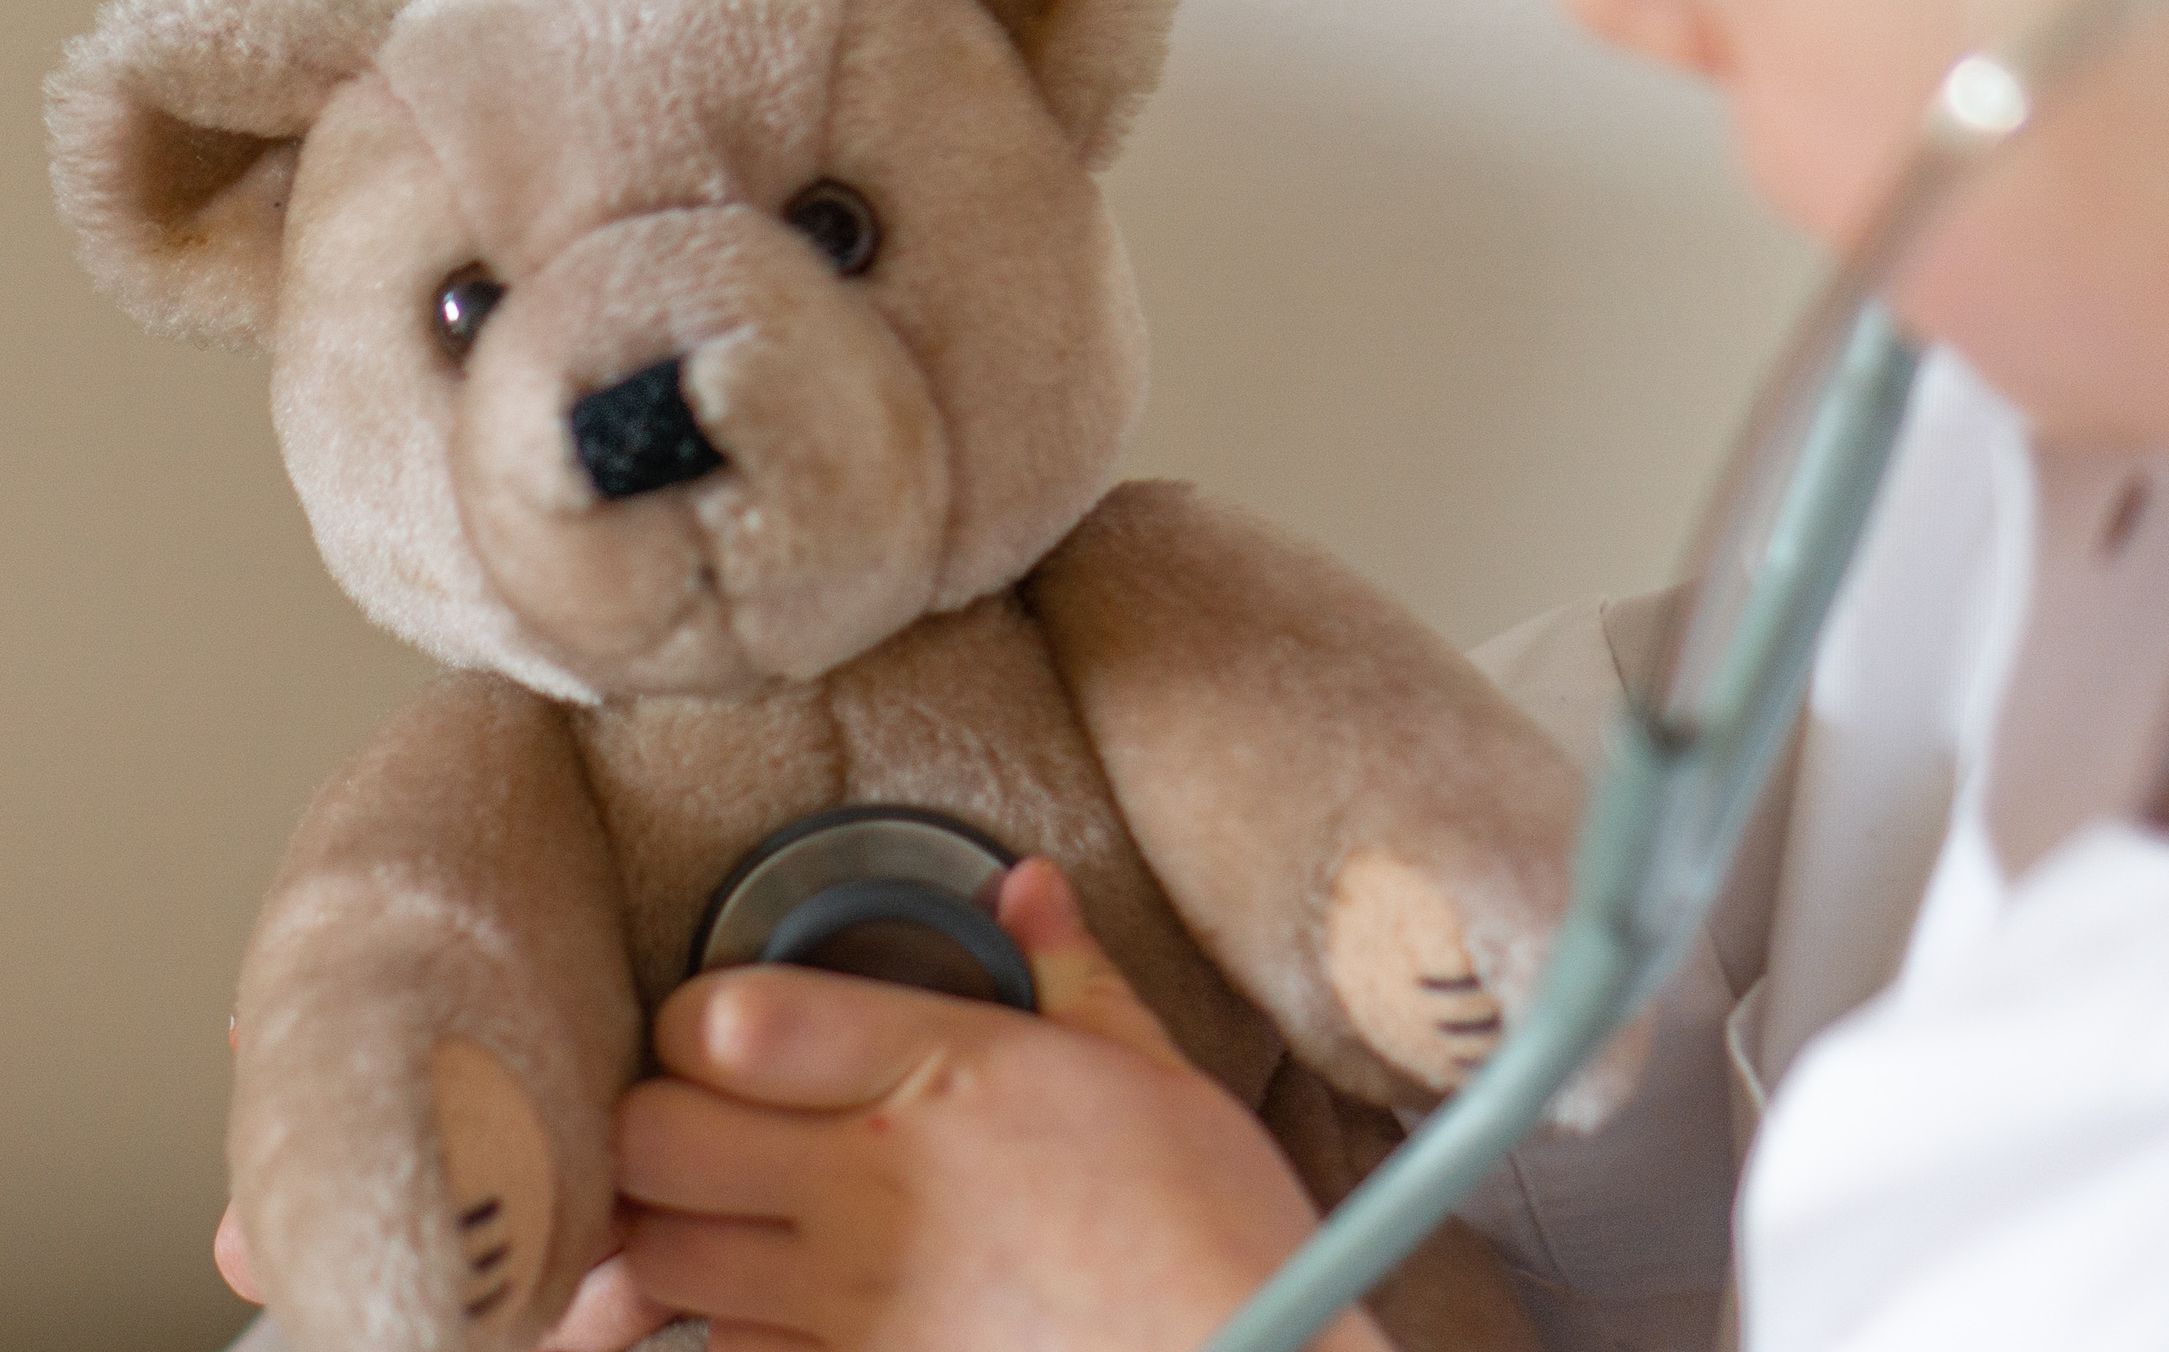 A teddy bear getting checked with a stethoscope